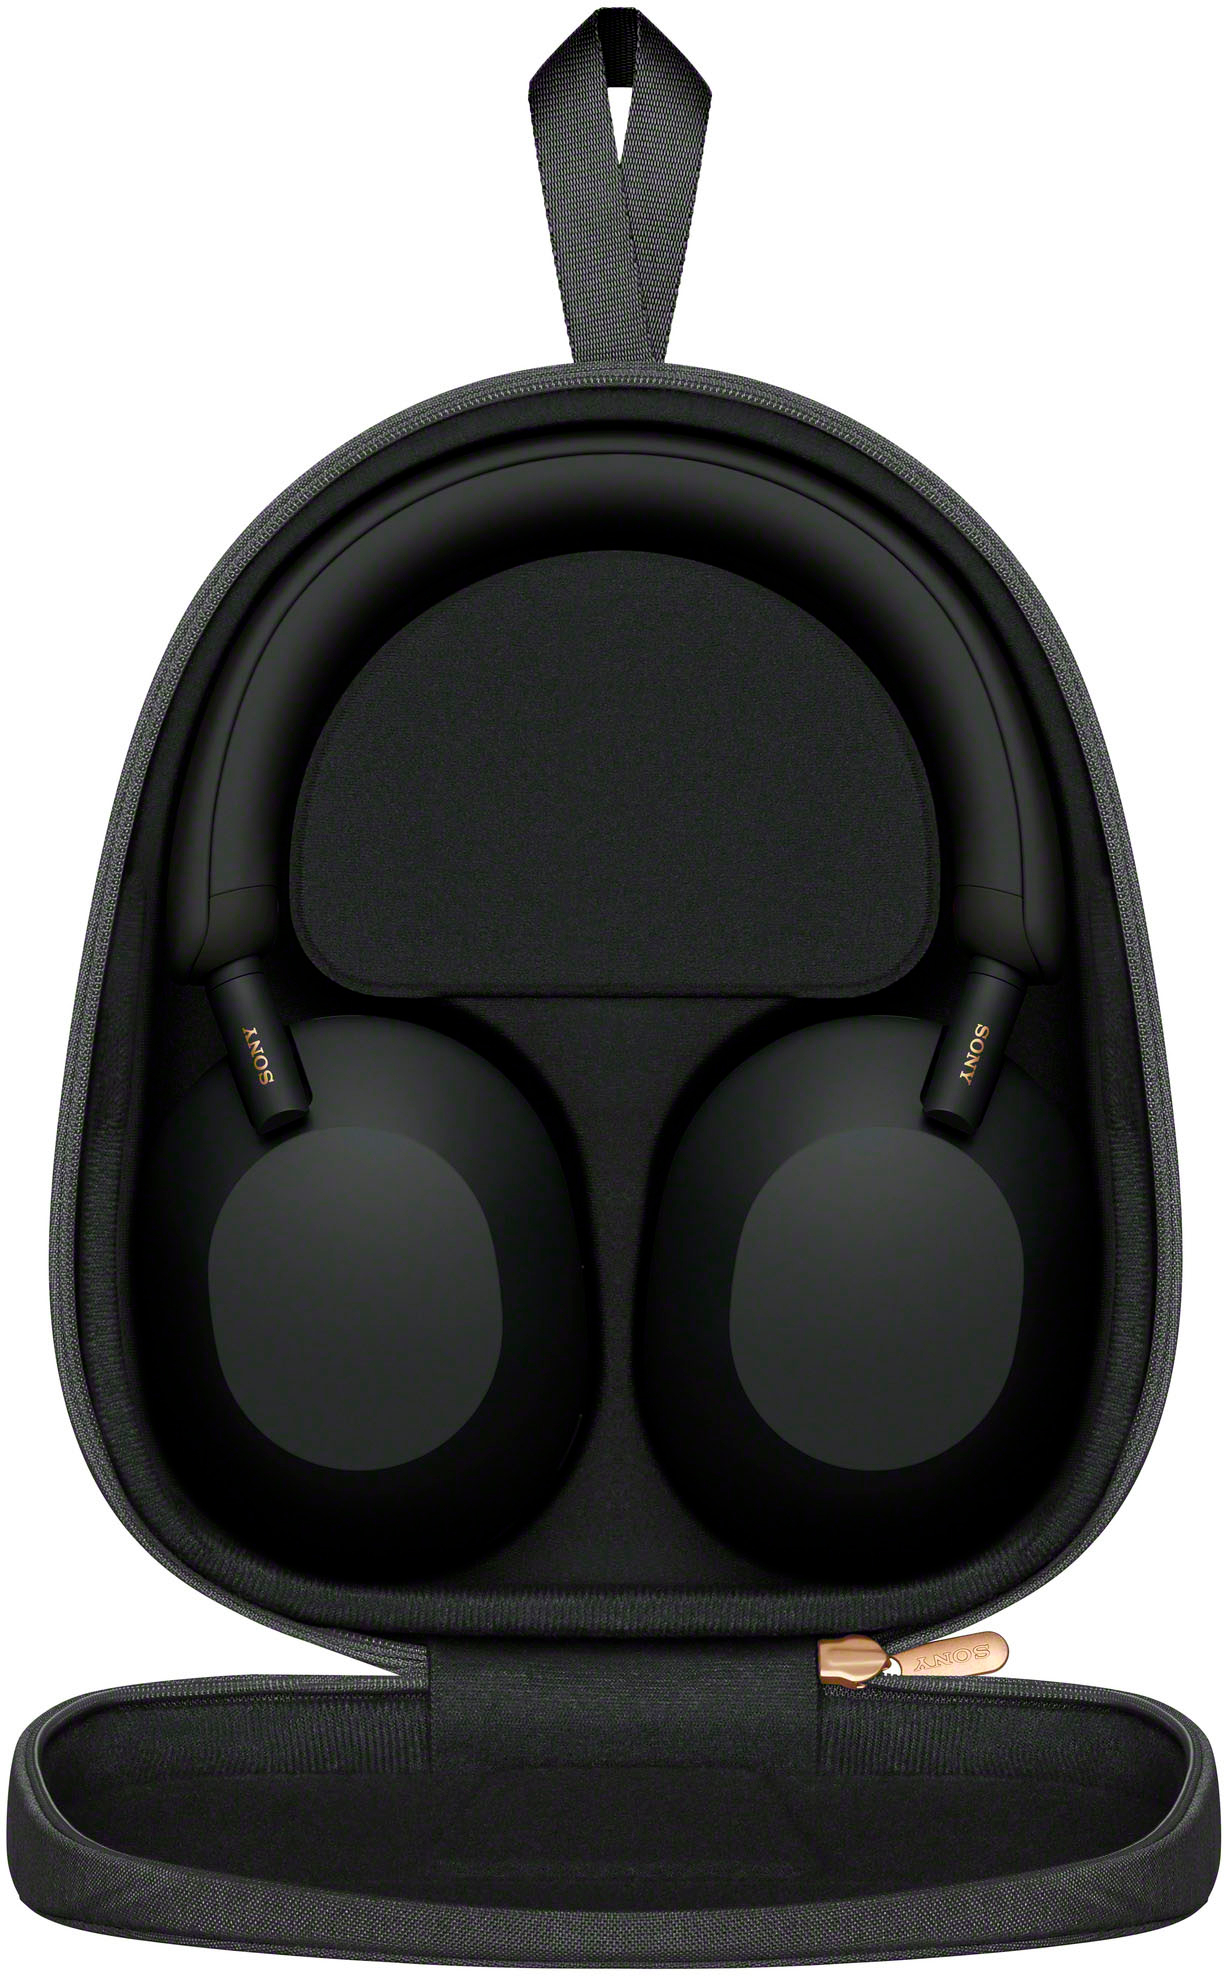 Sony WH1000XM5 Wireless Noise-Canceling Over-the-Ear Headphones